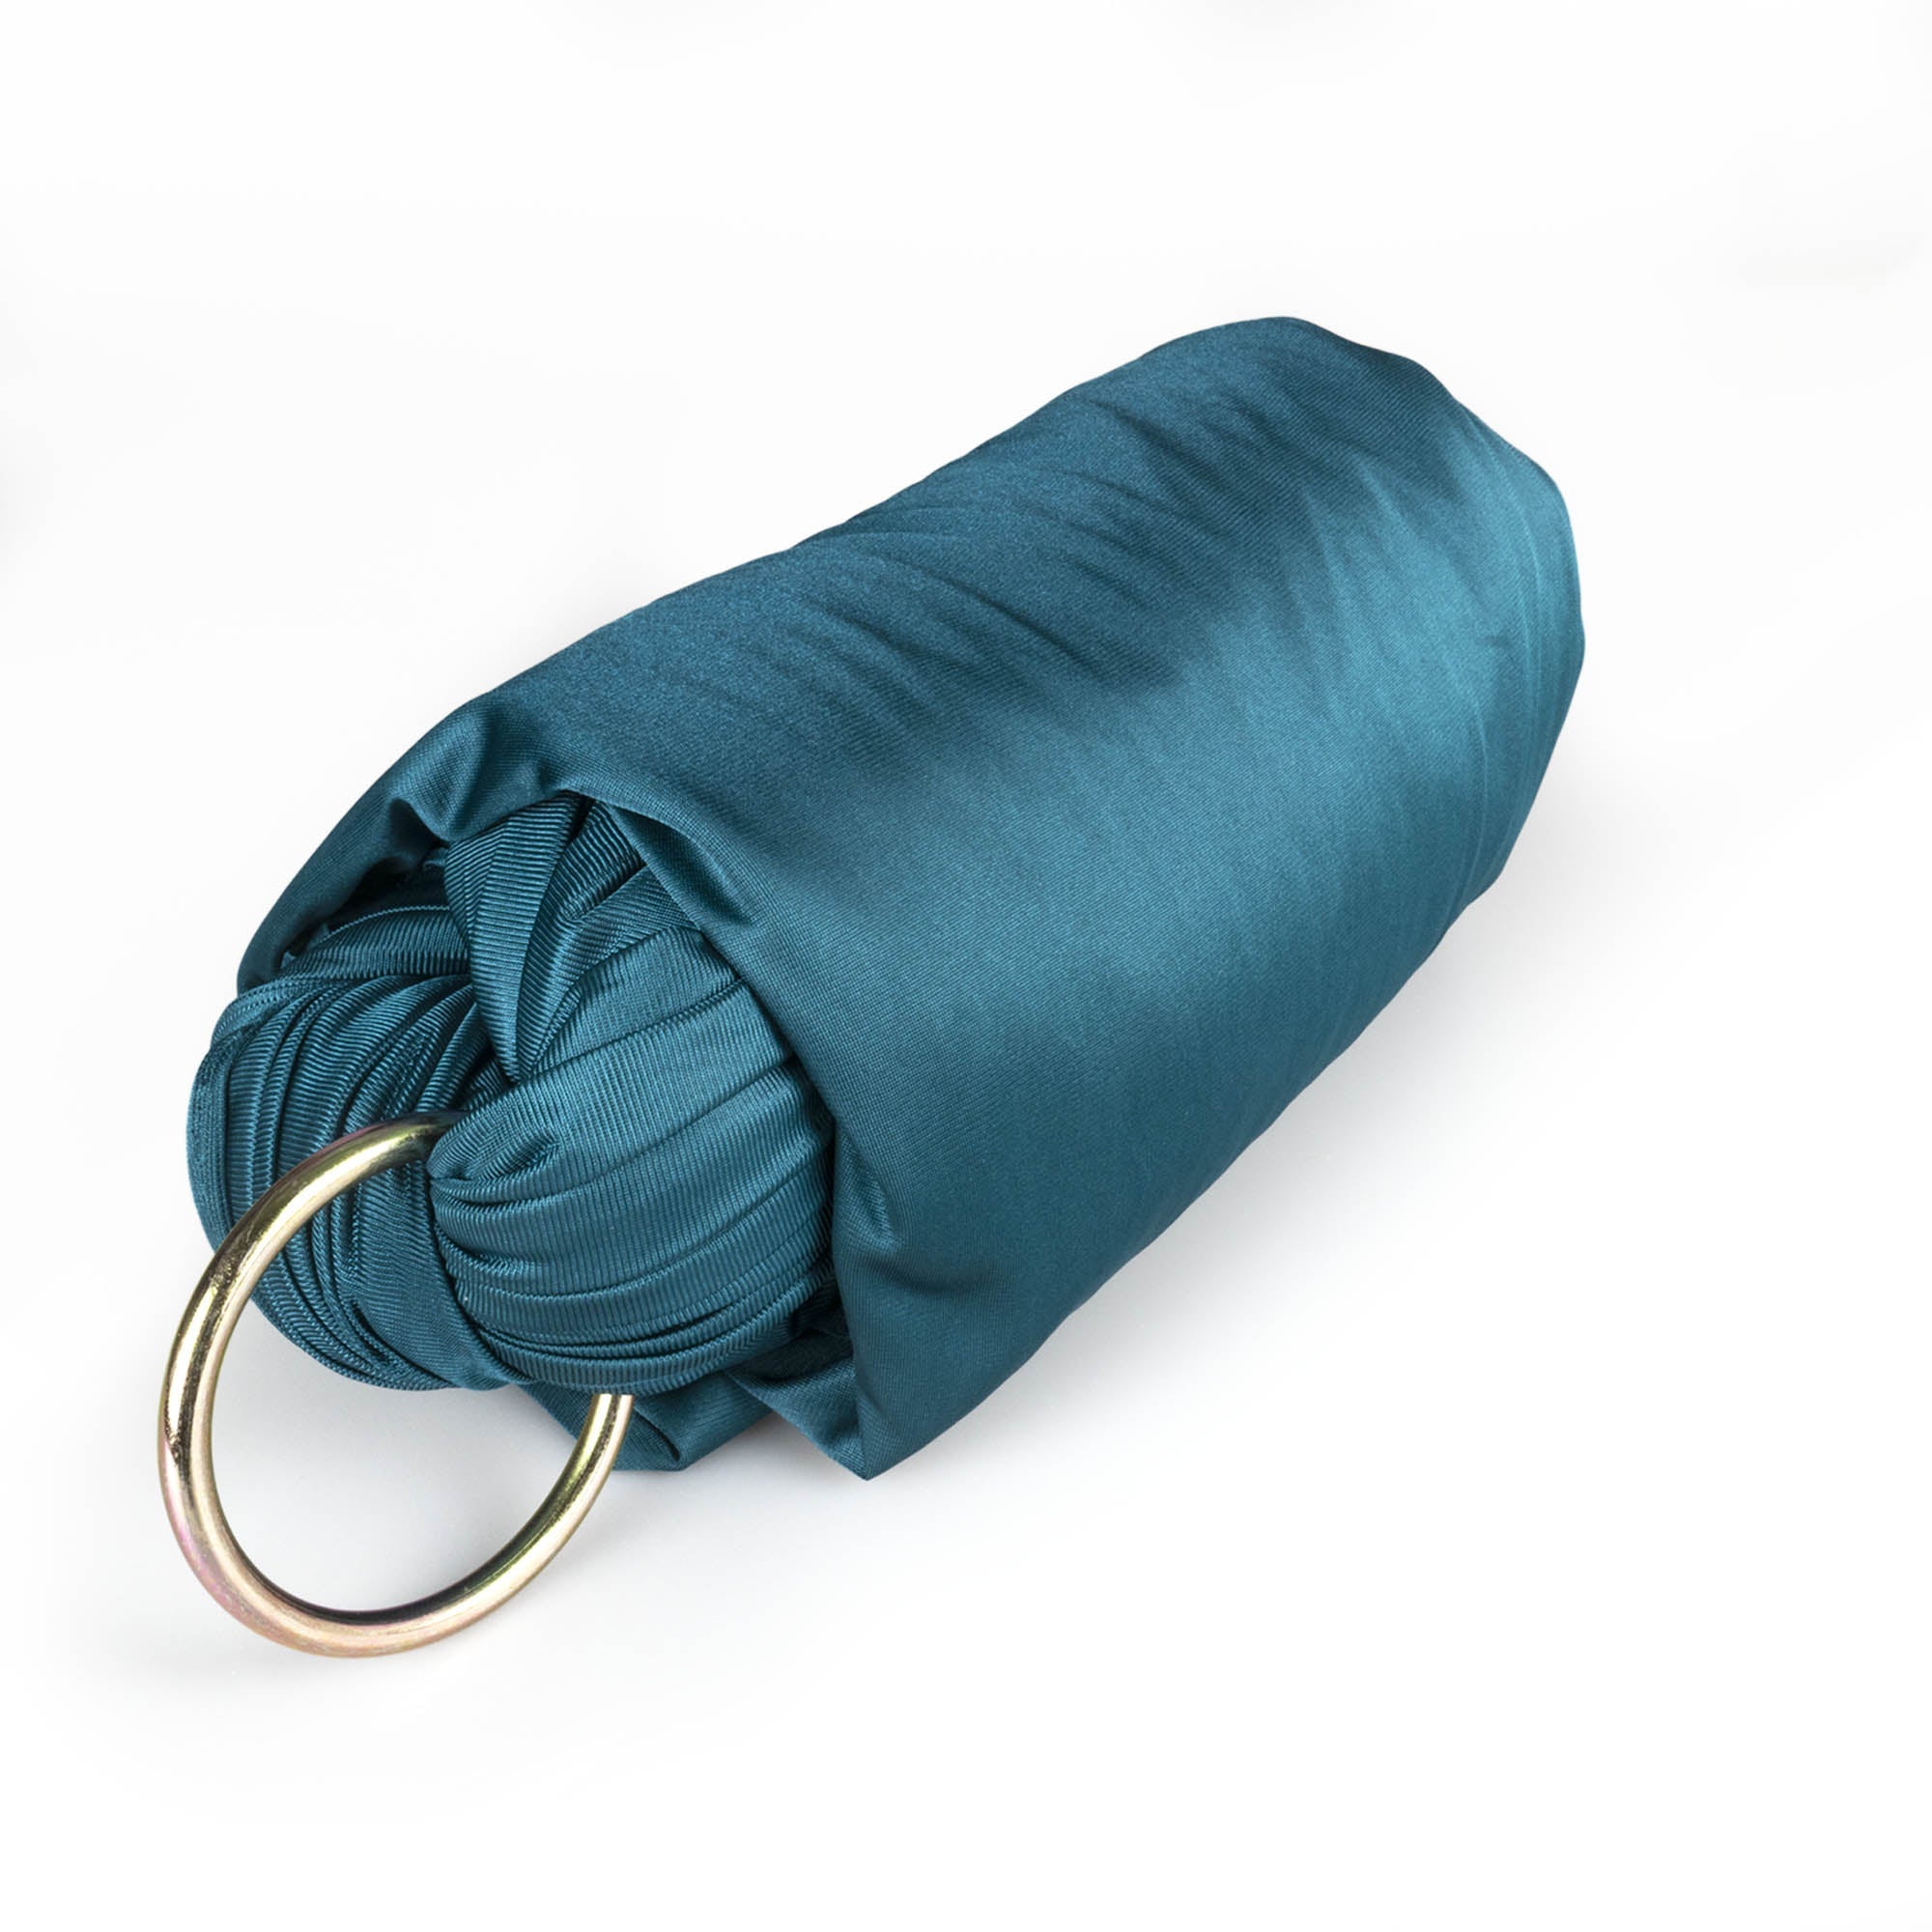 Pine green yoga hammock rolled up with rings attached